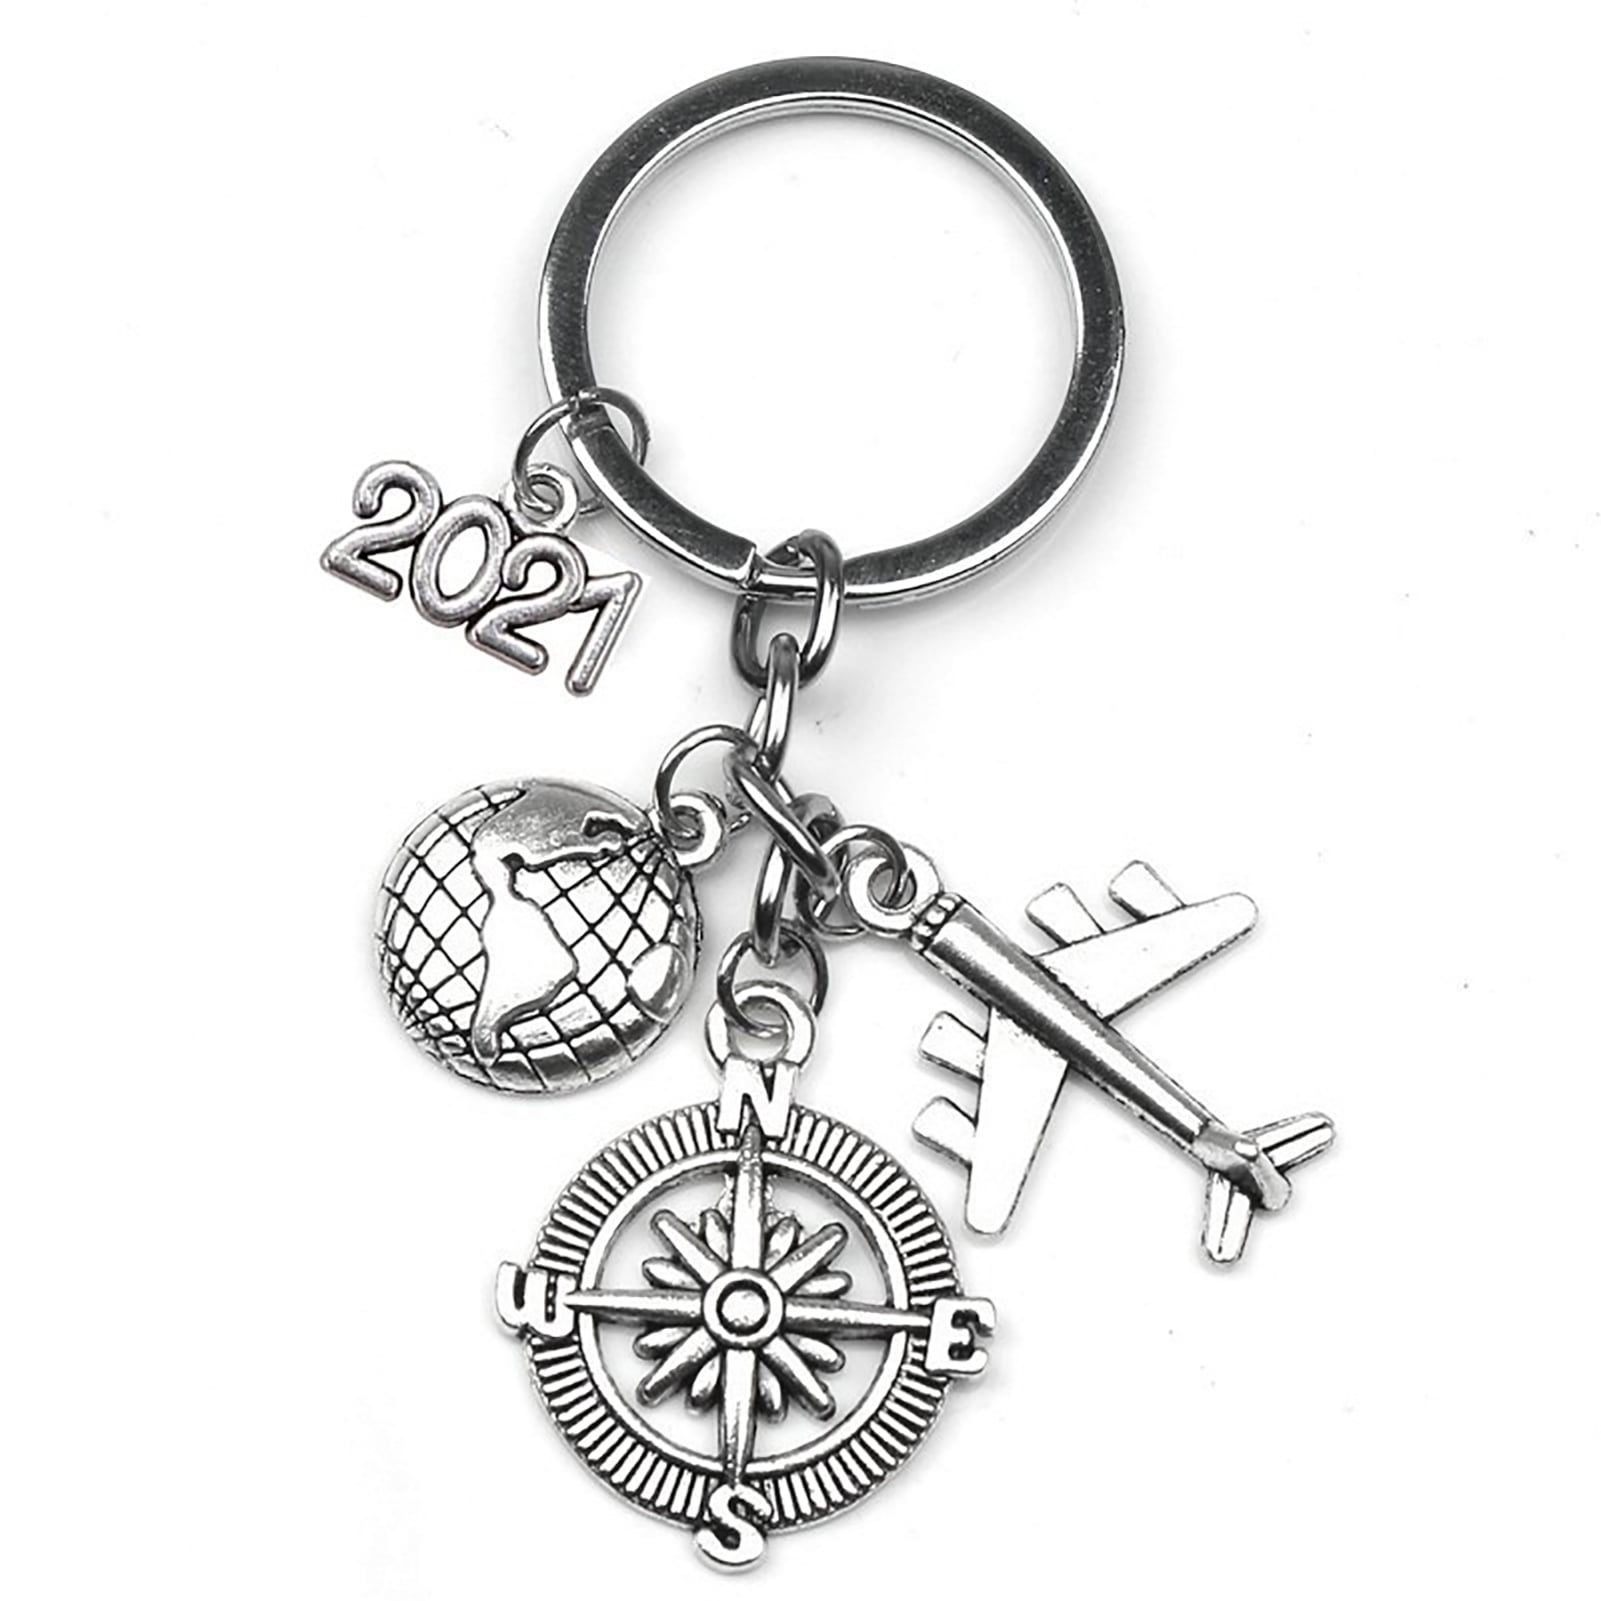 Time keychain College Gift Clock Charm Graduation Gift Time Piece charm Clock Keychain Time clock charm Clock Keyring Time Key ring